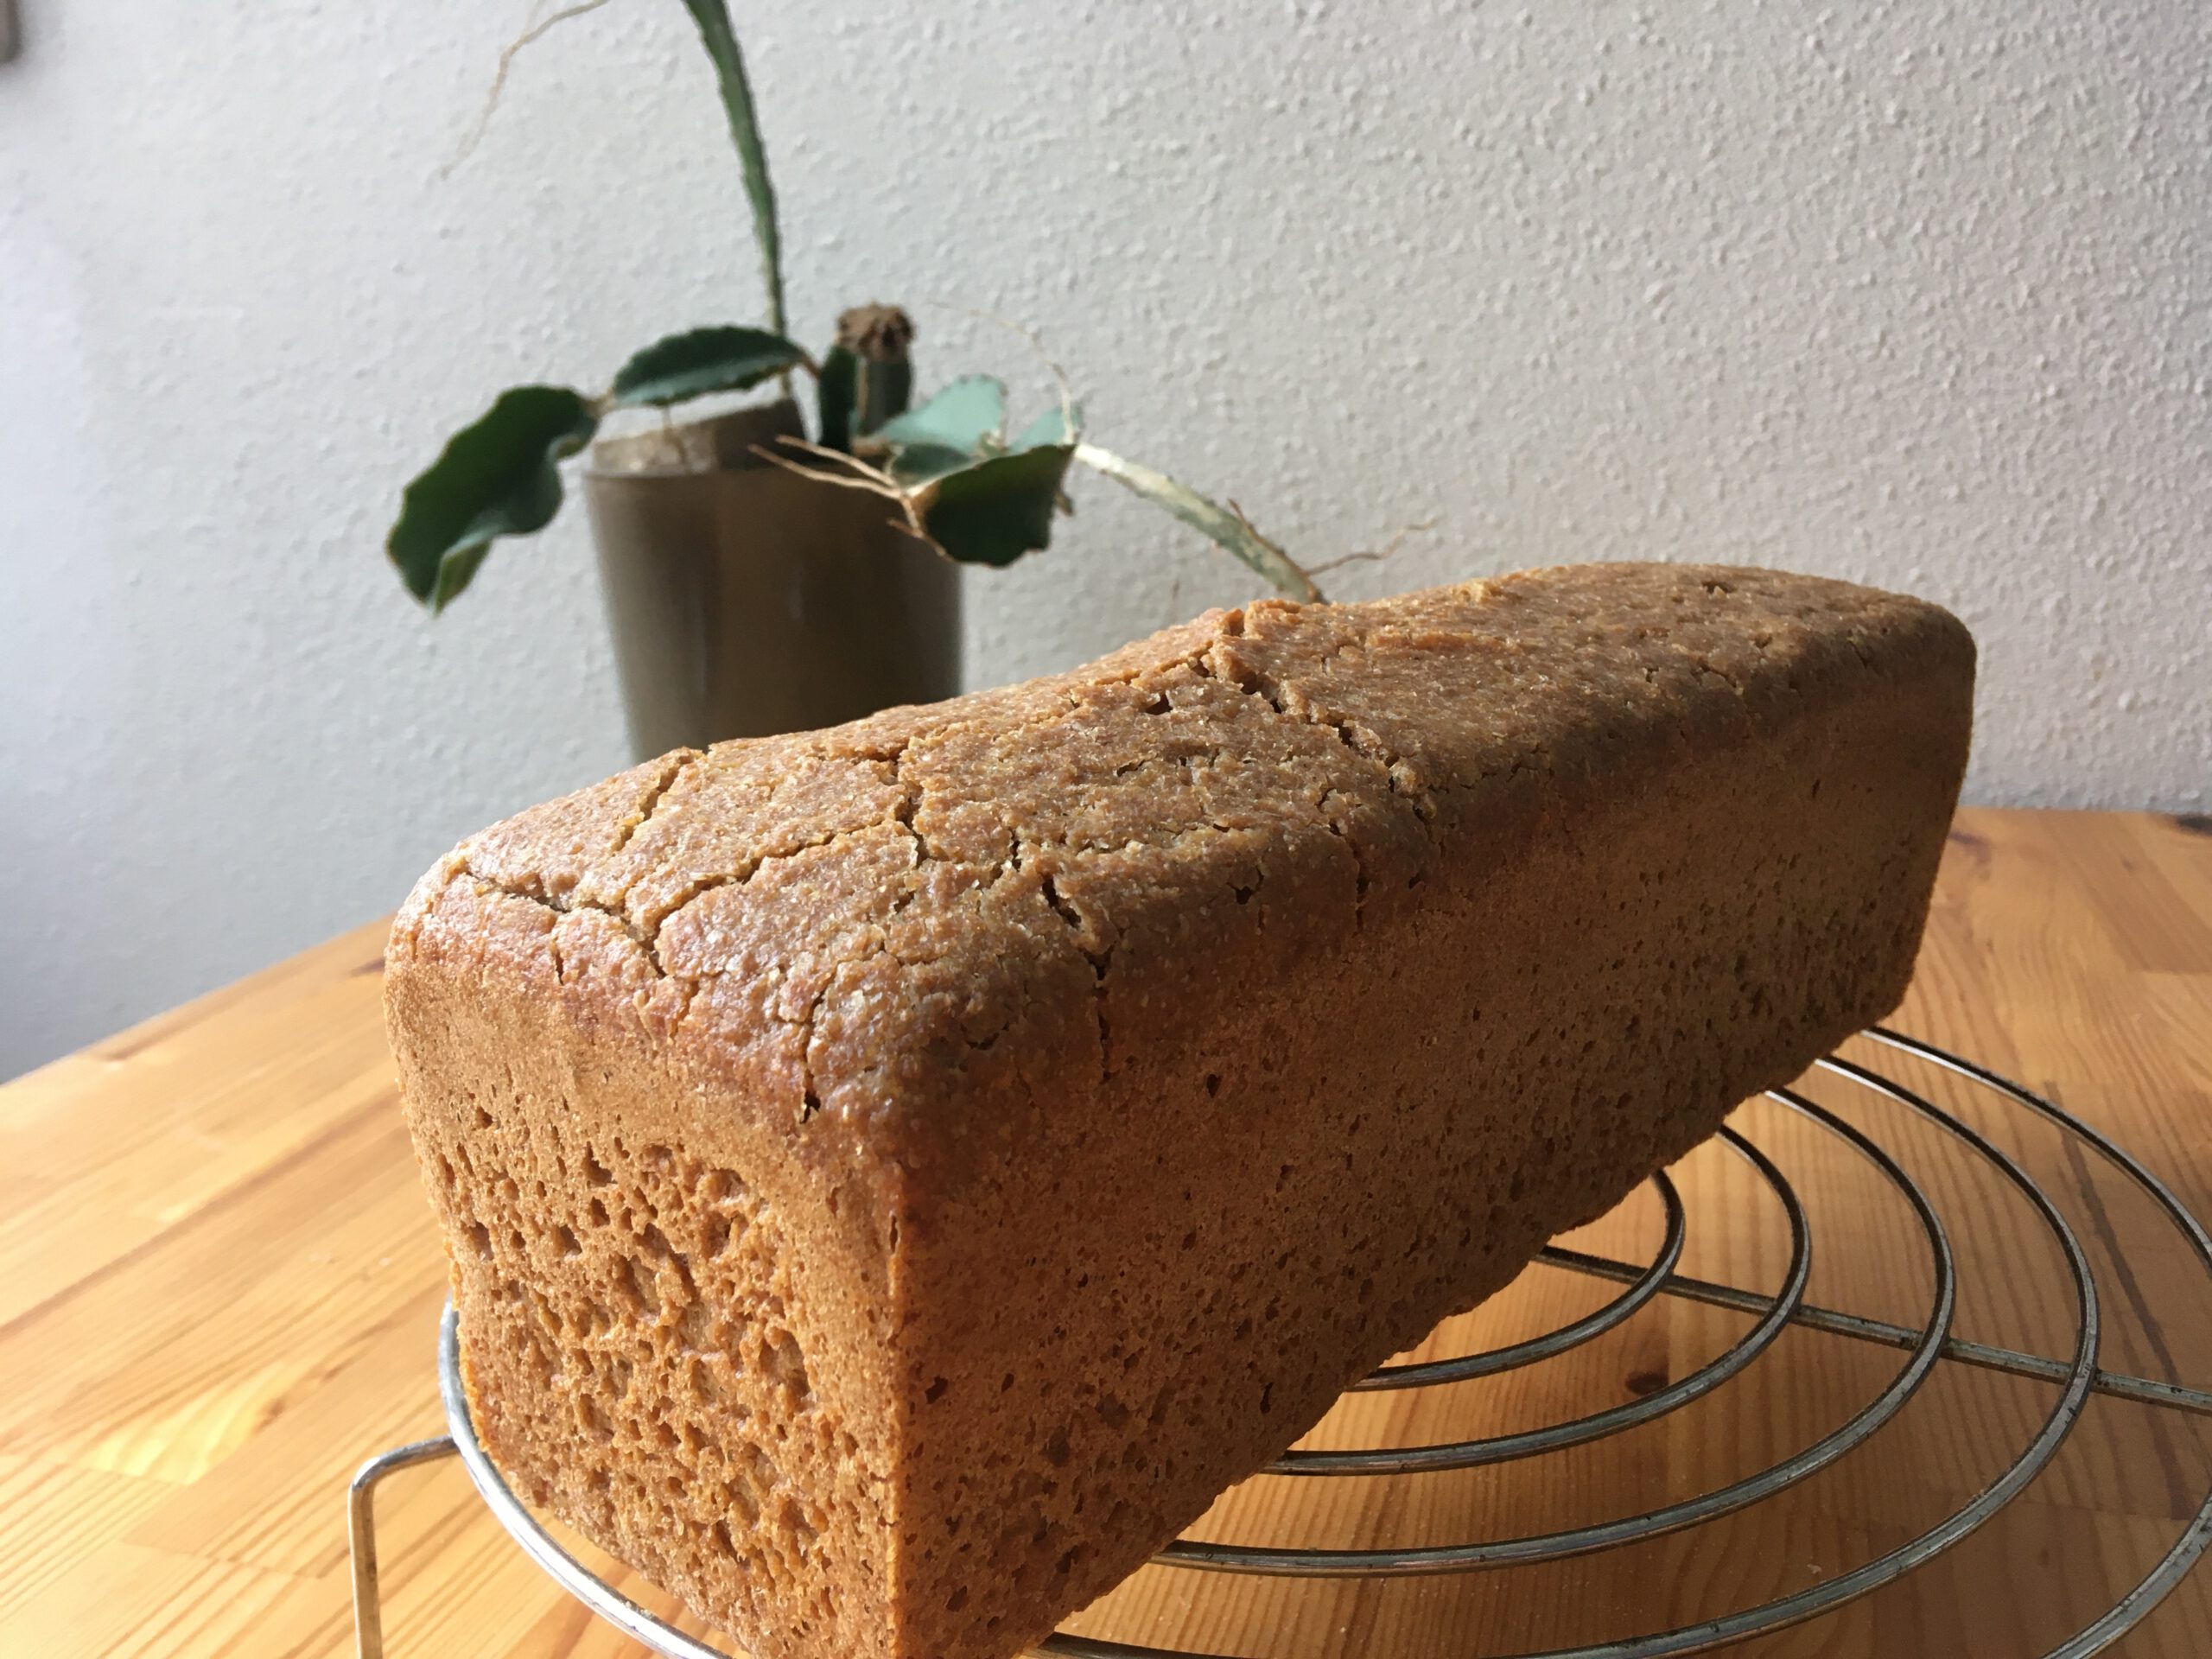 The large (1100gr) einkorn loaf baked in my 'normal' oven with overnight fermentation